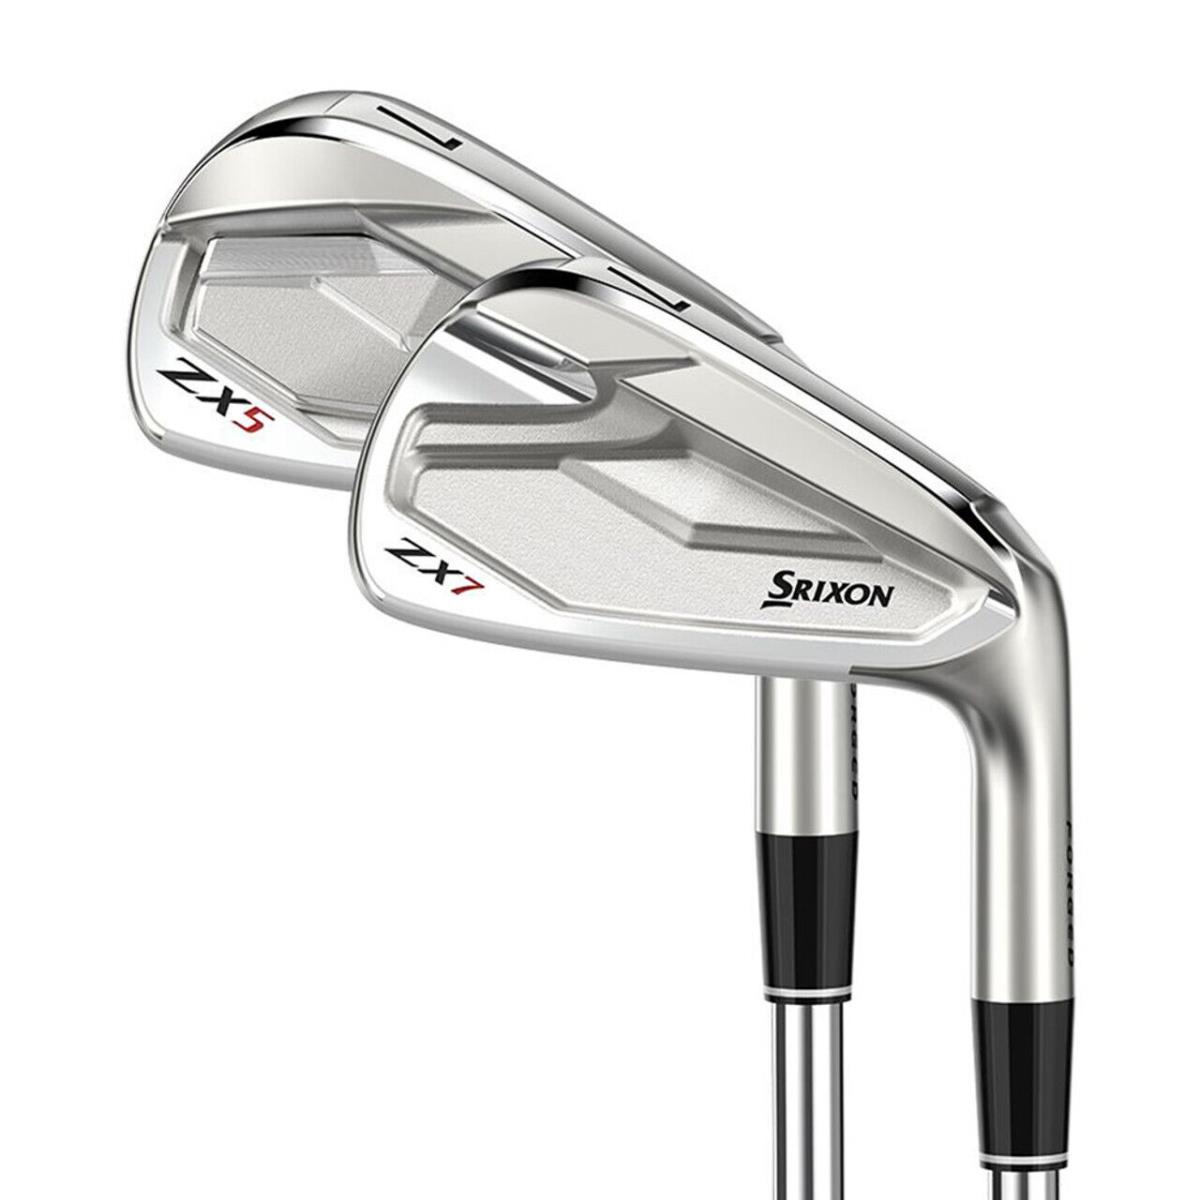 Srixon Zx7 or Zx5 Iron Set Irons - Choose Model Make up and Flex and LH / RH